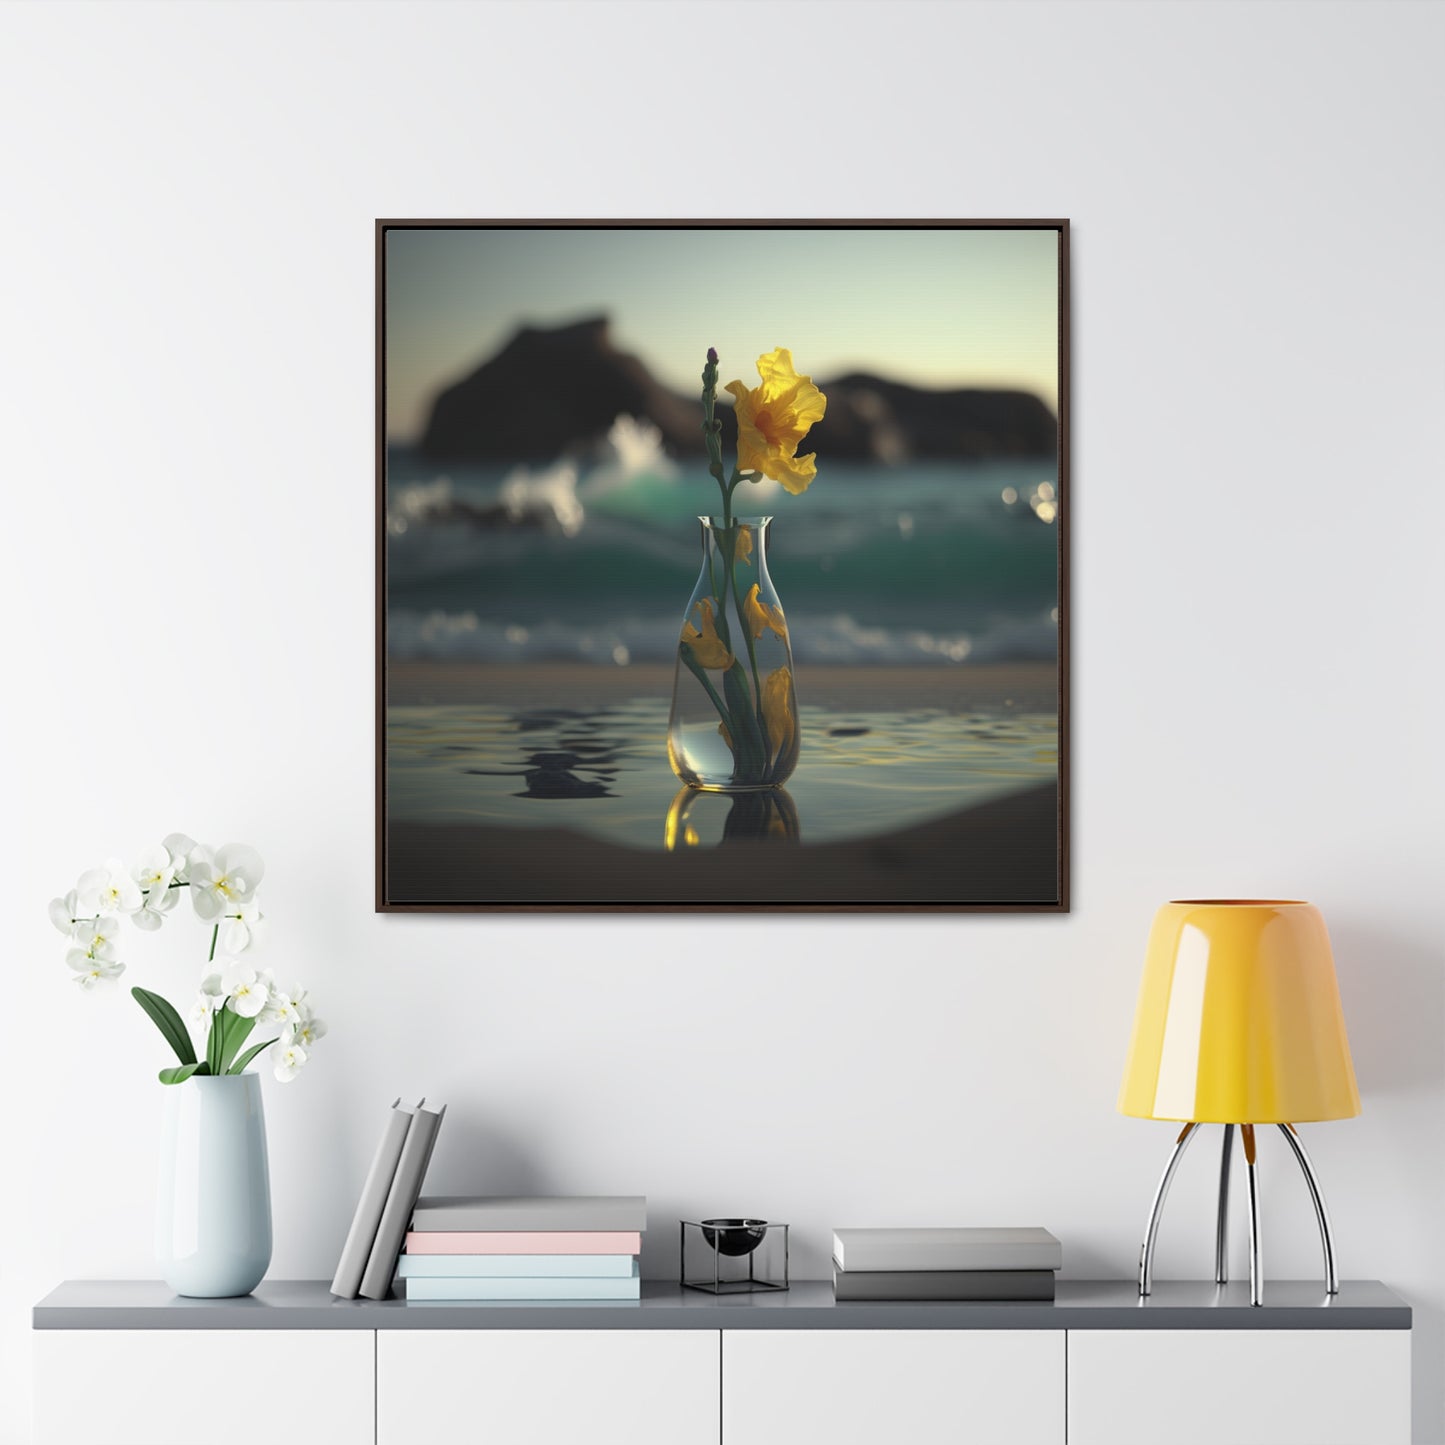 Gallery Canvas Wraps, Square Frame Yellow Gladiolus glass 2